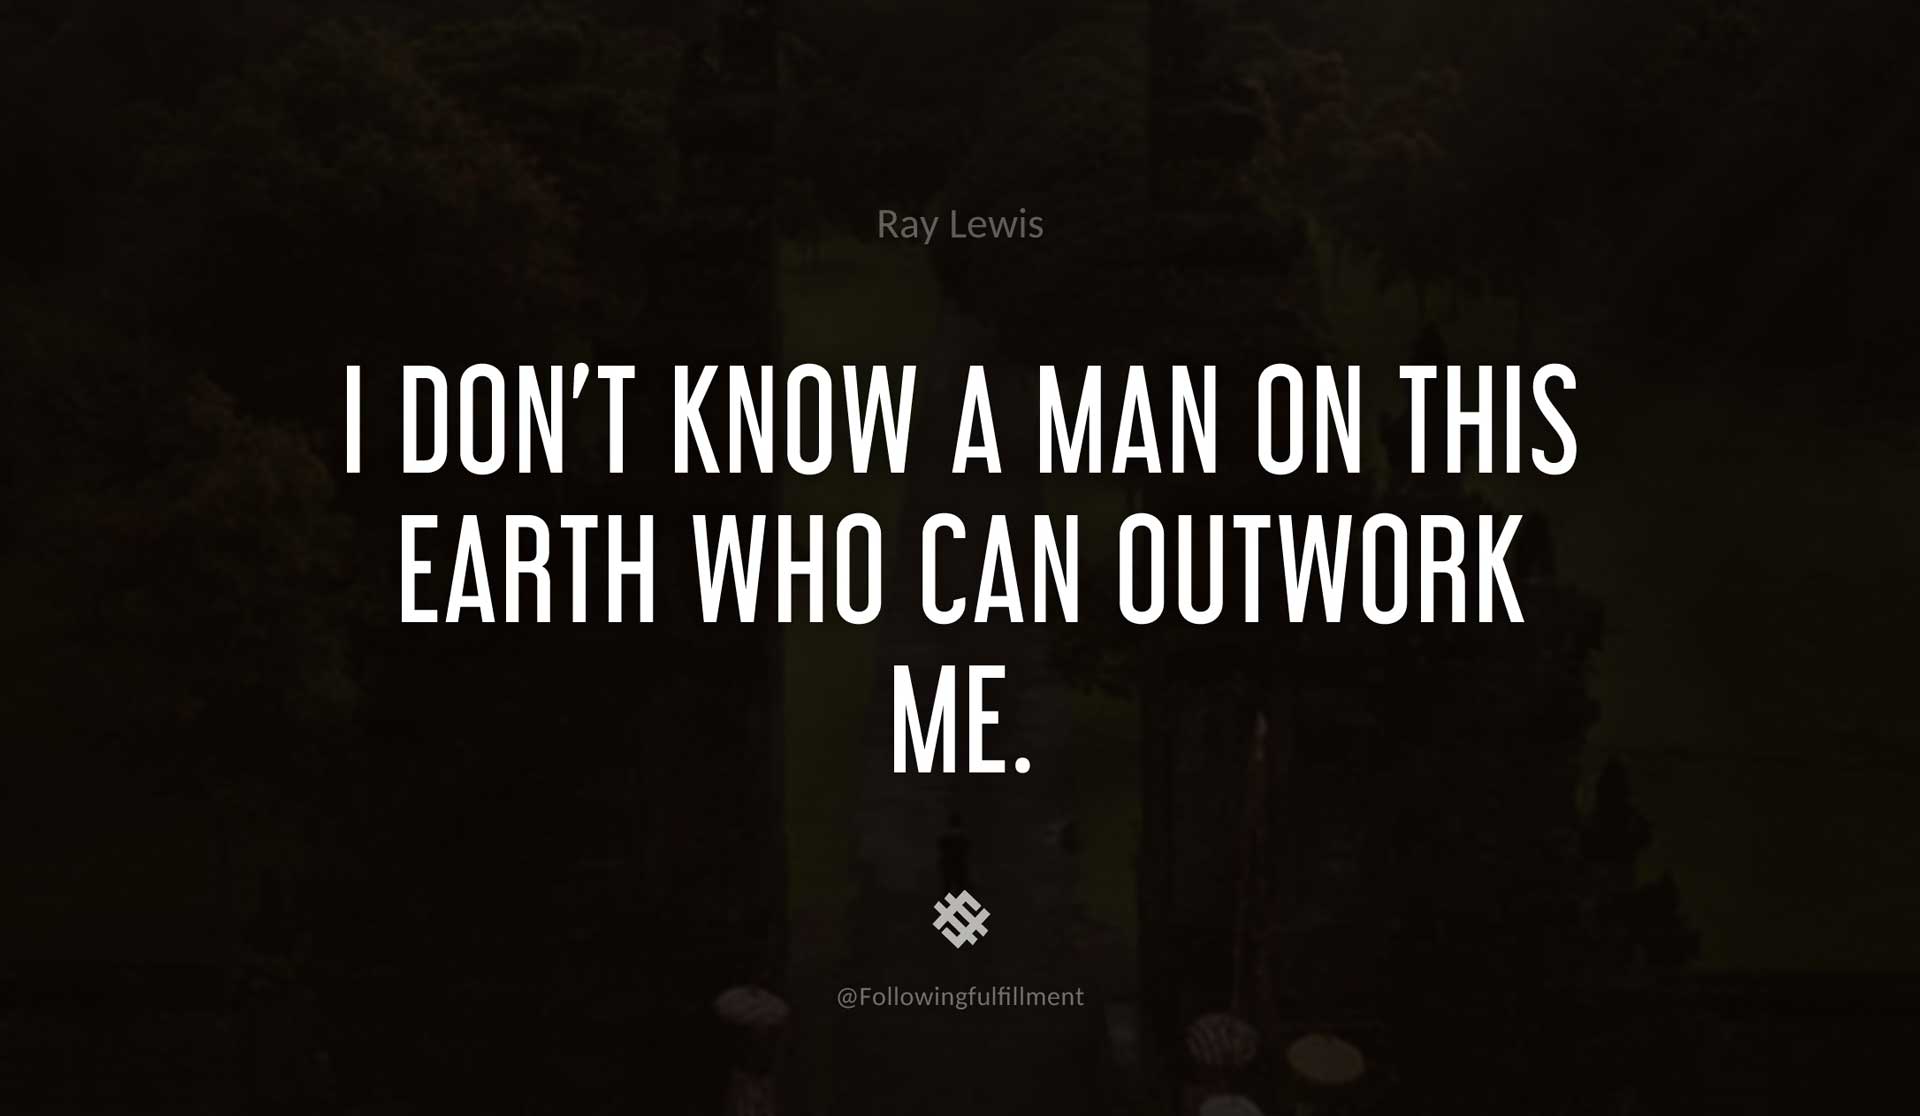 I-don't-know-a-man-on-this-Earth-who-can-outwork-me.-RAY-LEWIS-Quote.jpg